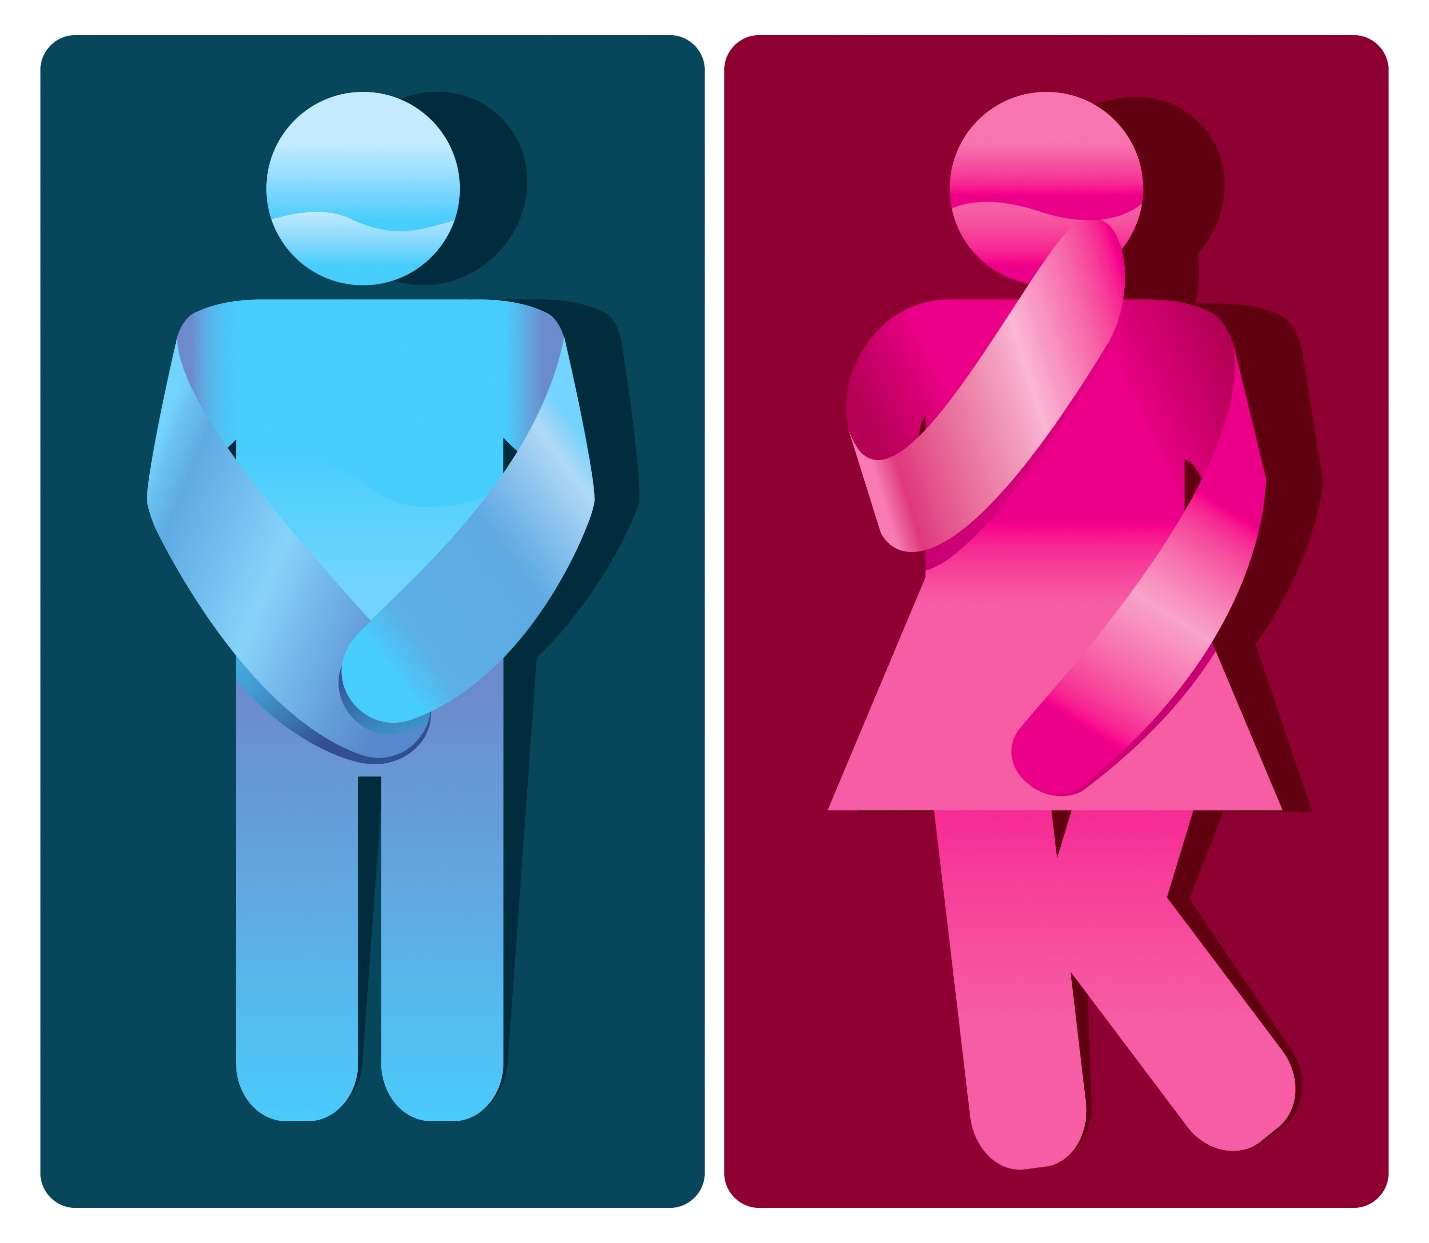 Overactive Bladder: What to Eat and Drink and What to Avoid